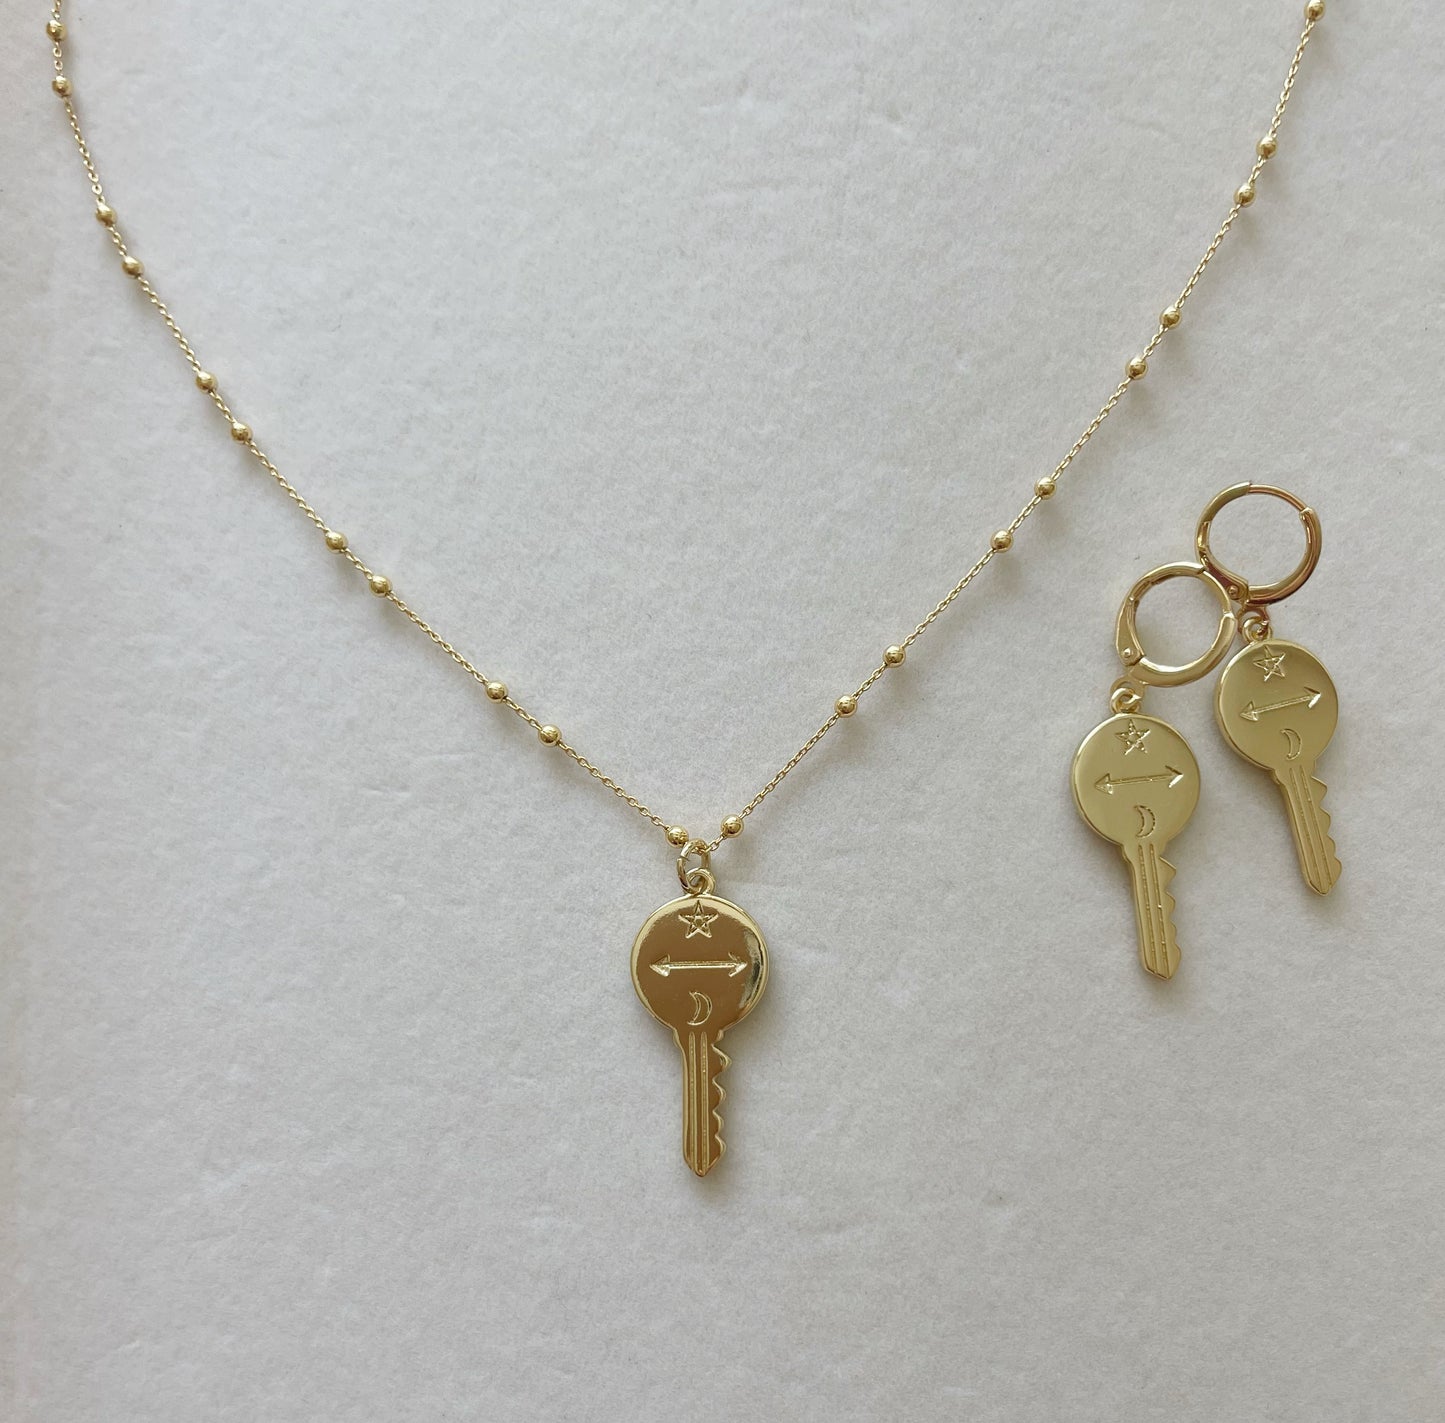 Free Your Mind Gold Filled Key Charm Huggies. Gold Filled Earrings